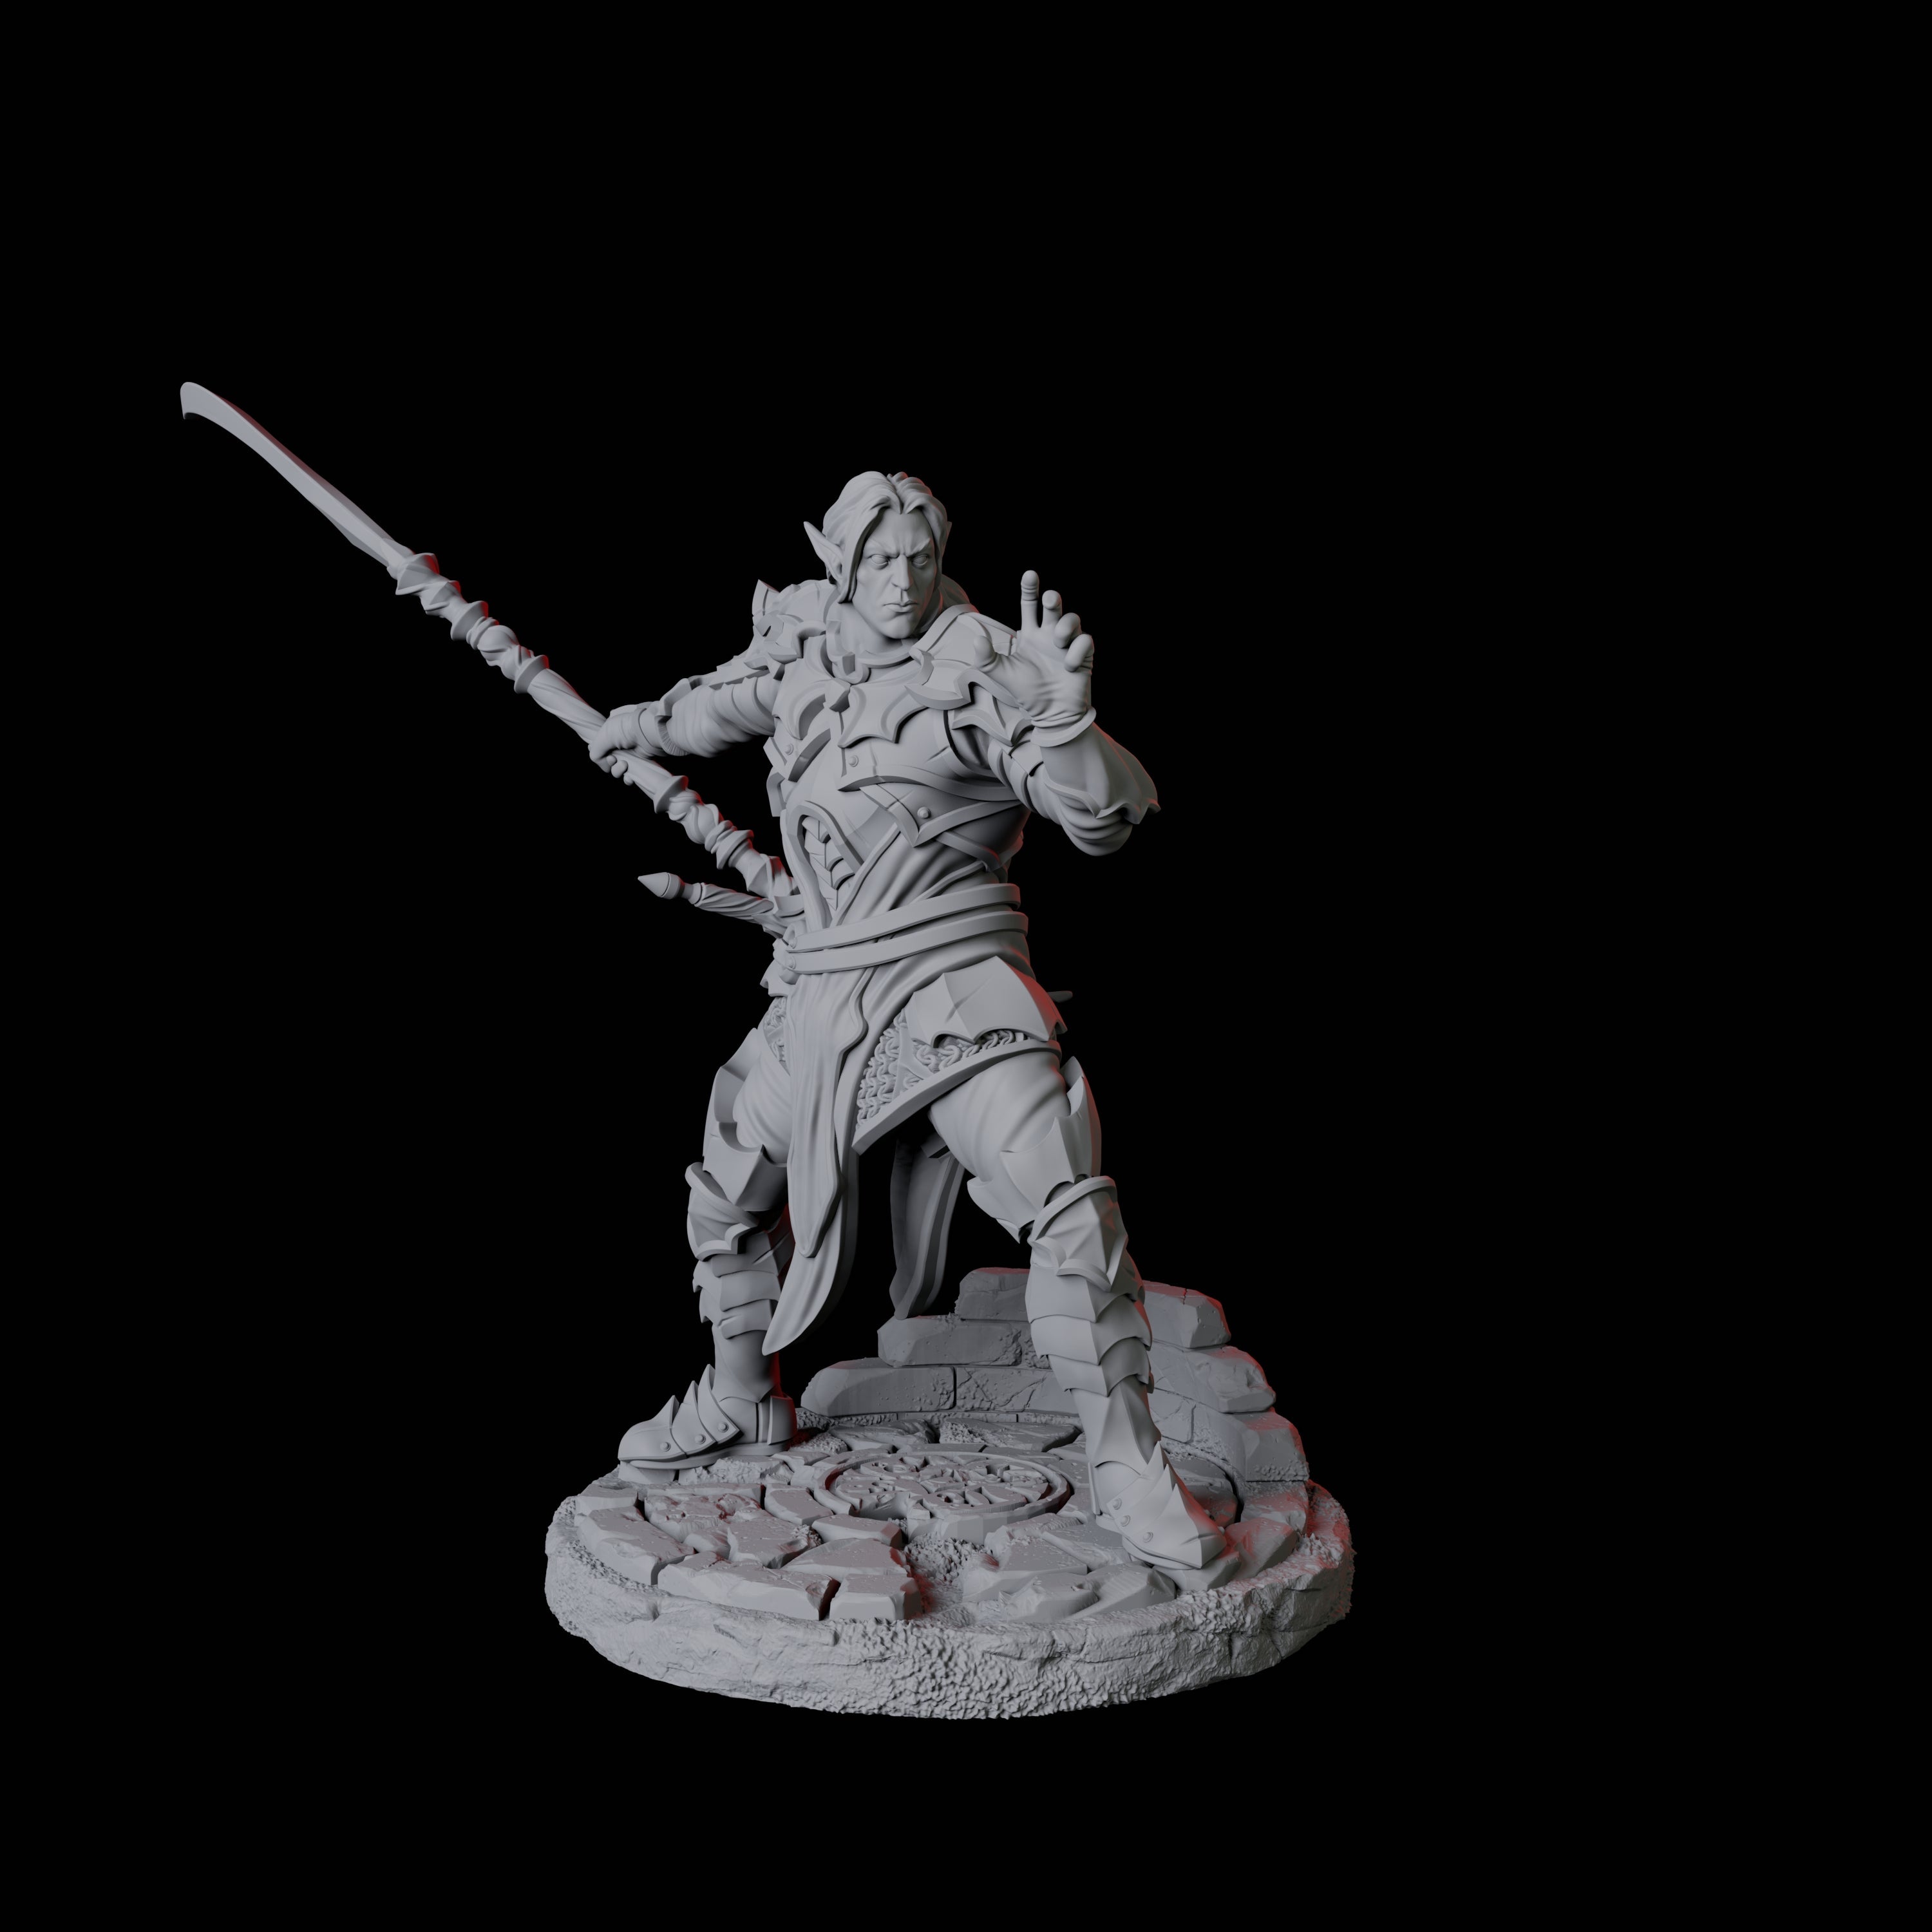 Poised Fighter C Miniature for Dungeons and Dragons, Pathfinder or other TTRPGs